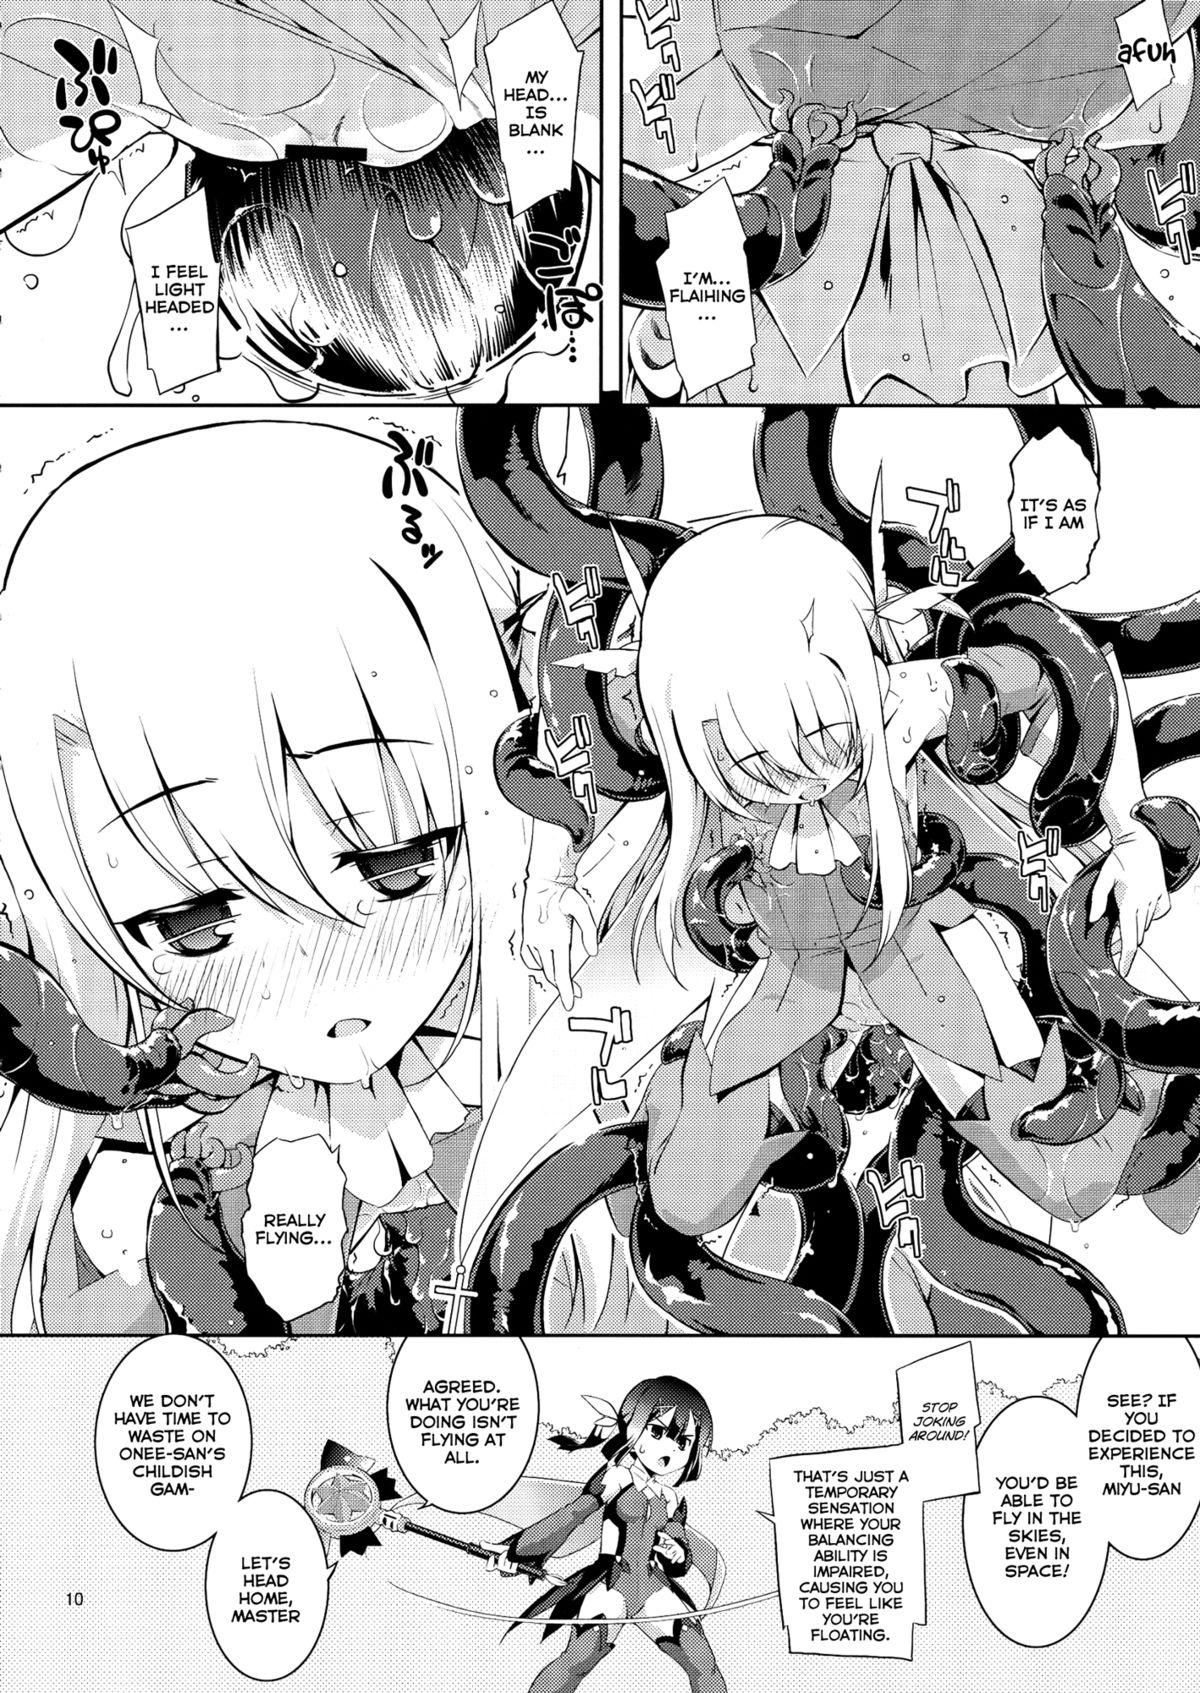 Blowing RE 18 - Fate kaleid liner prisma illya Rough Porn - Page 10